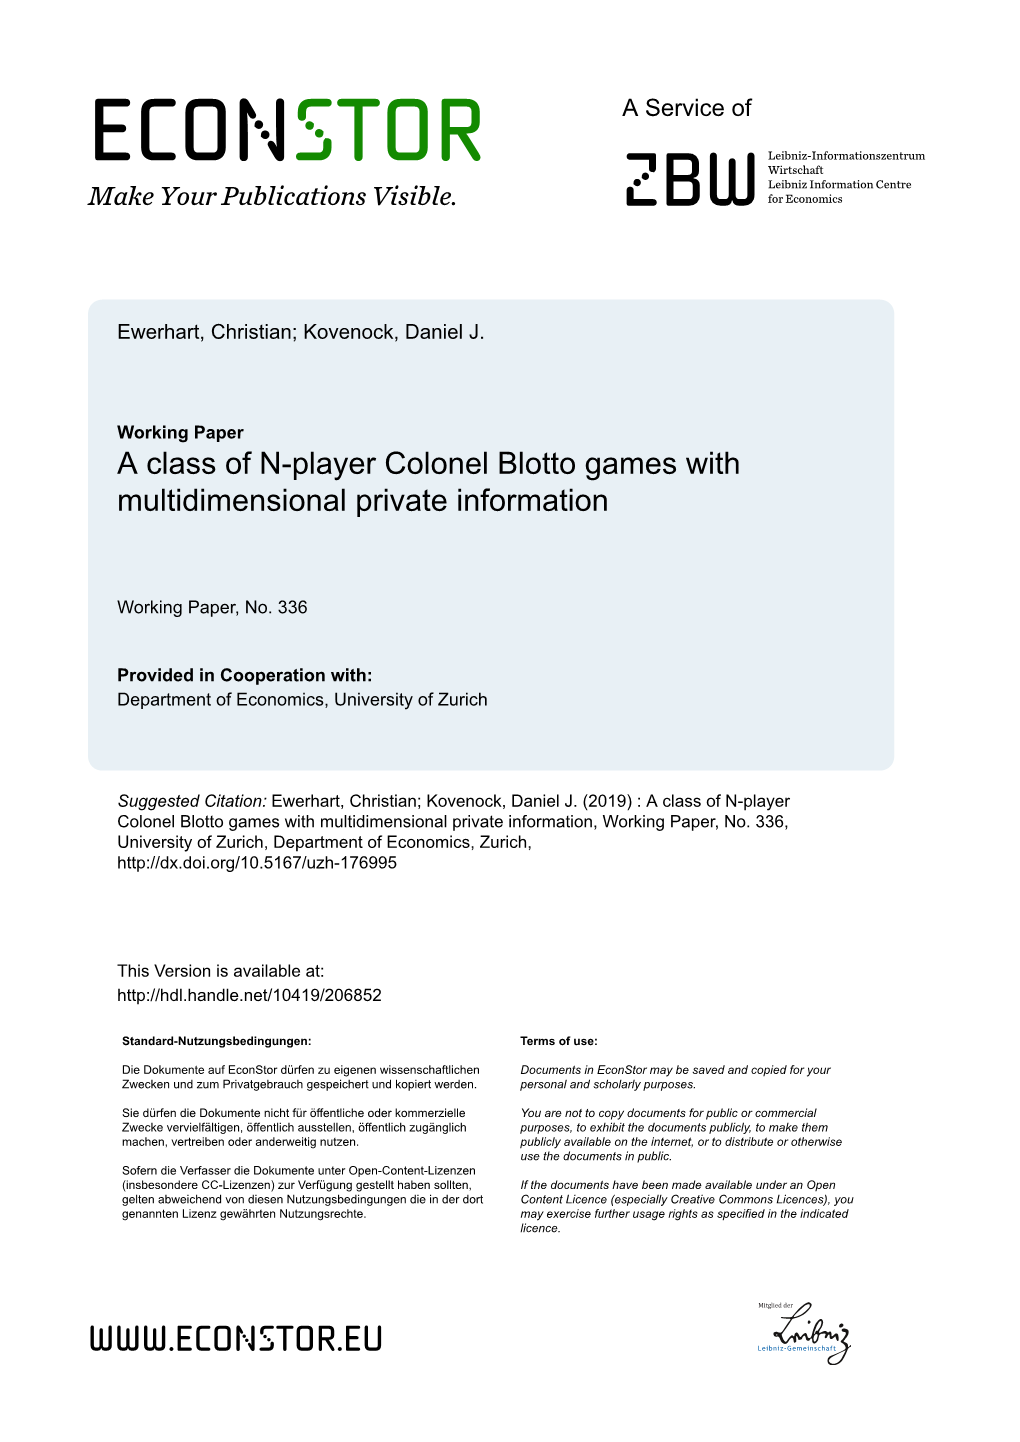 A Class of N-Player Colonel Blotto Games with Multidimensional Private Information